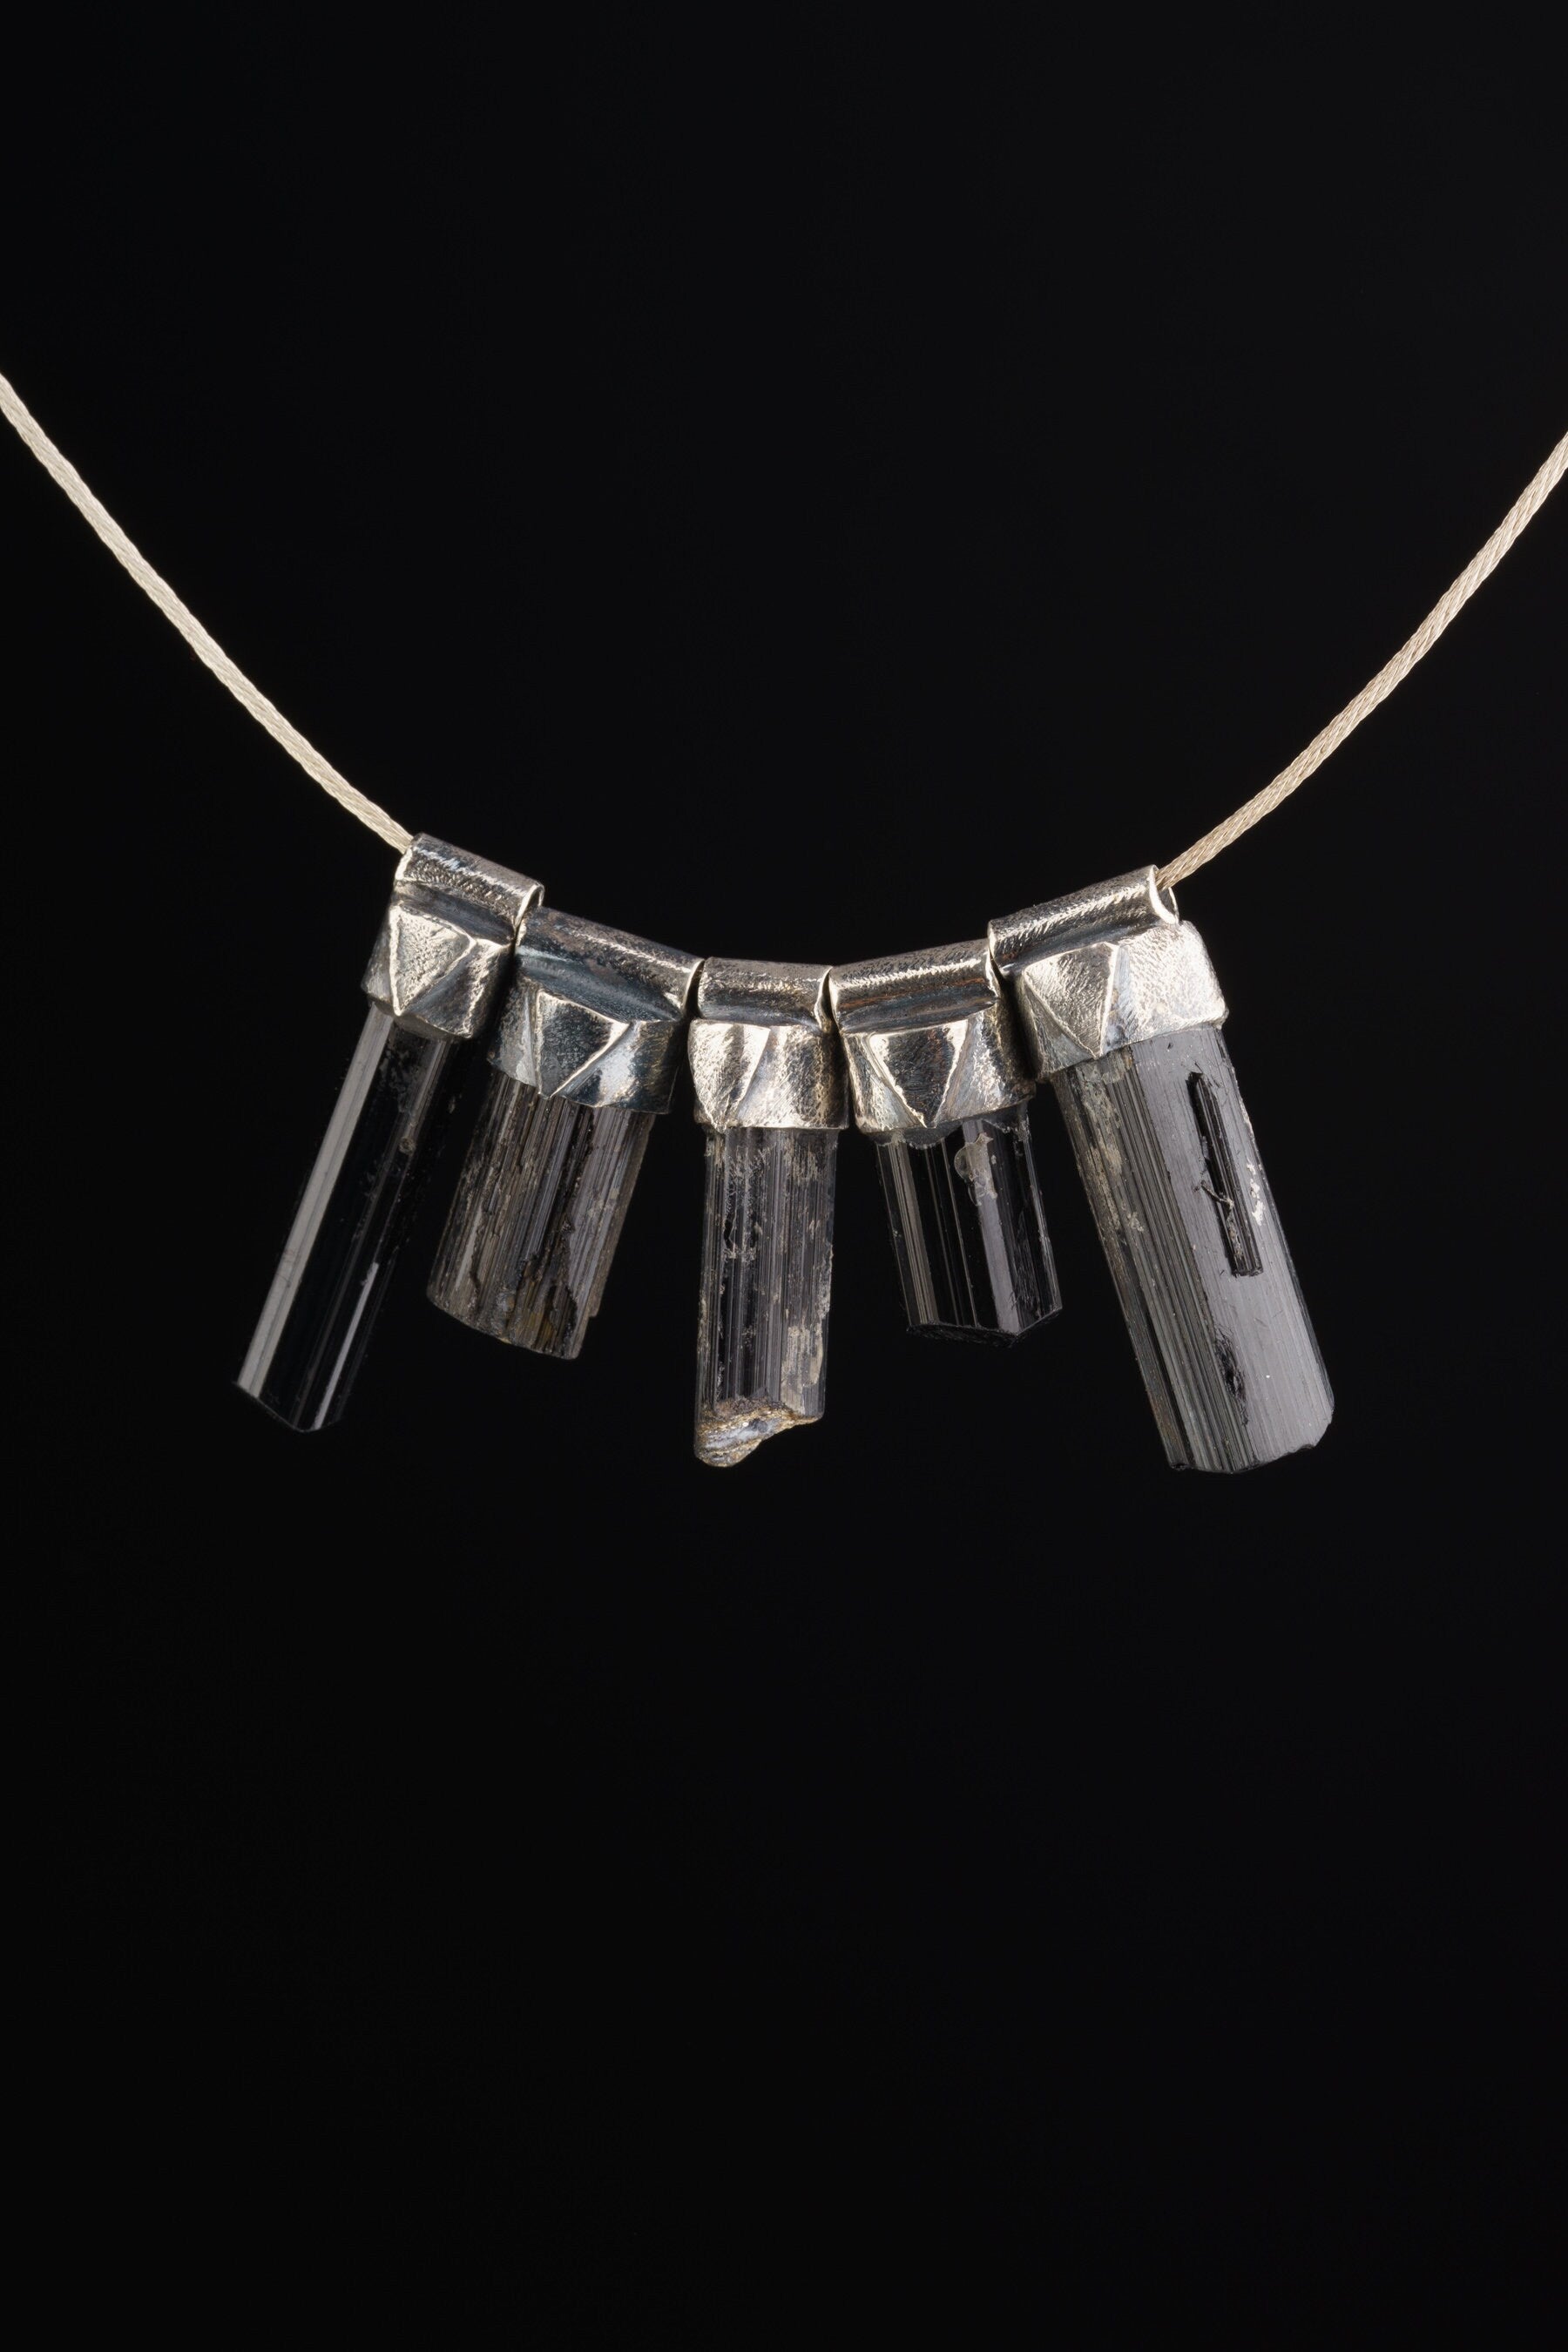 Black Tourmaline Terminated SPECIMEN - Stack Pendant -Textured & Oxidised - 925 Sterling Silver - Crystal Necklace